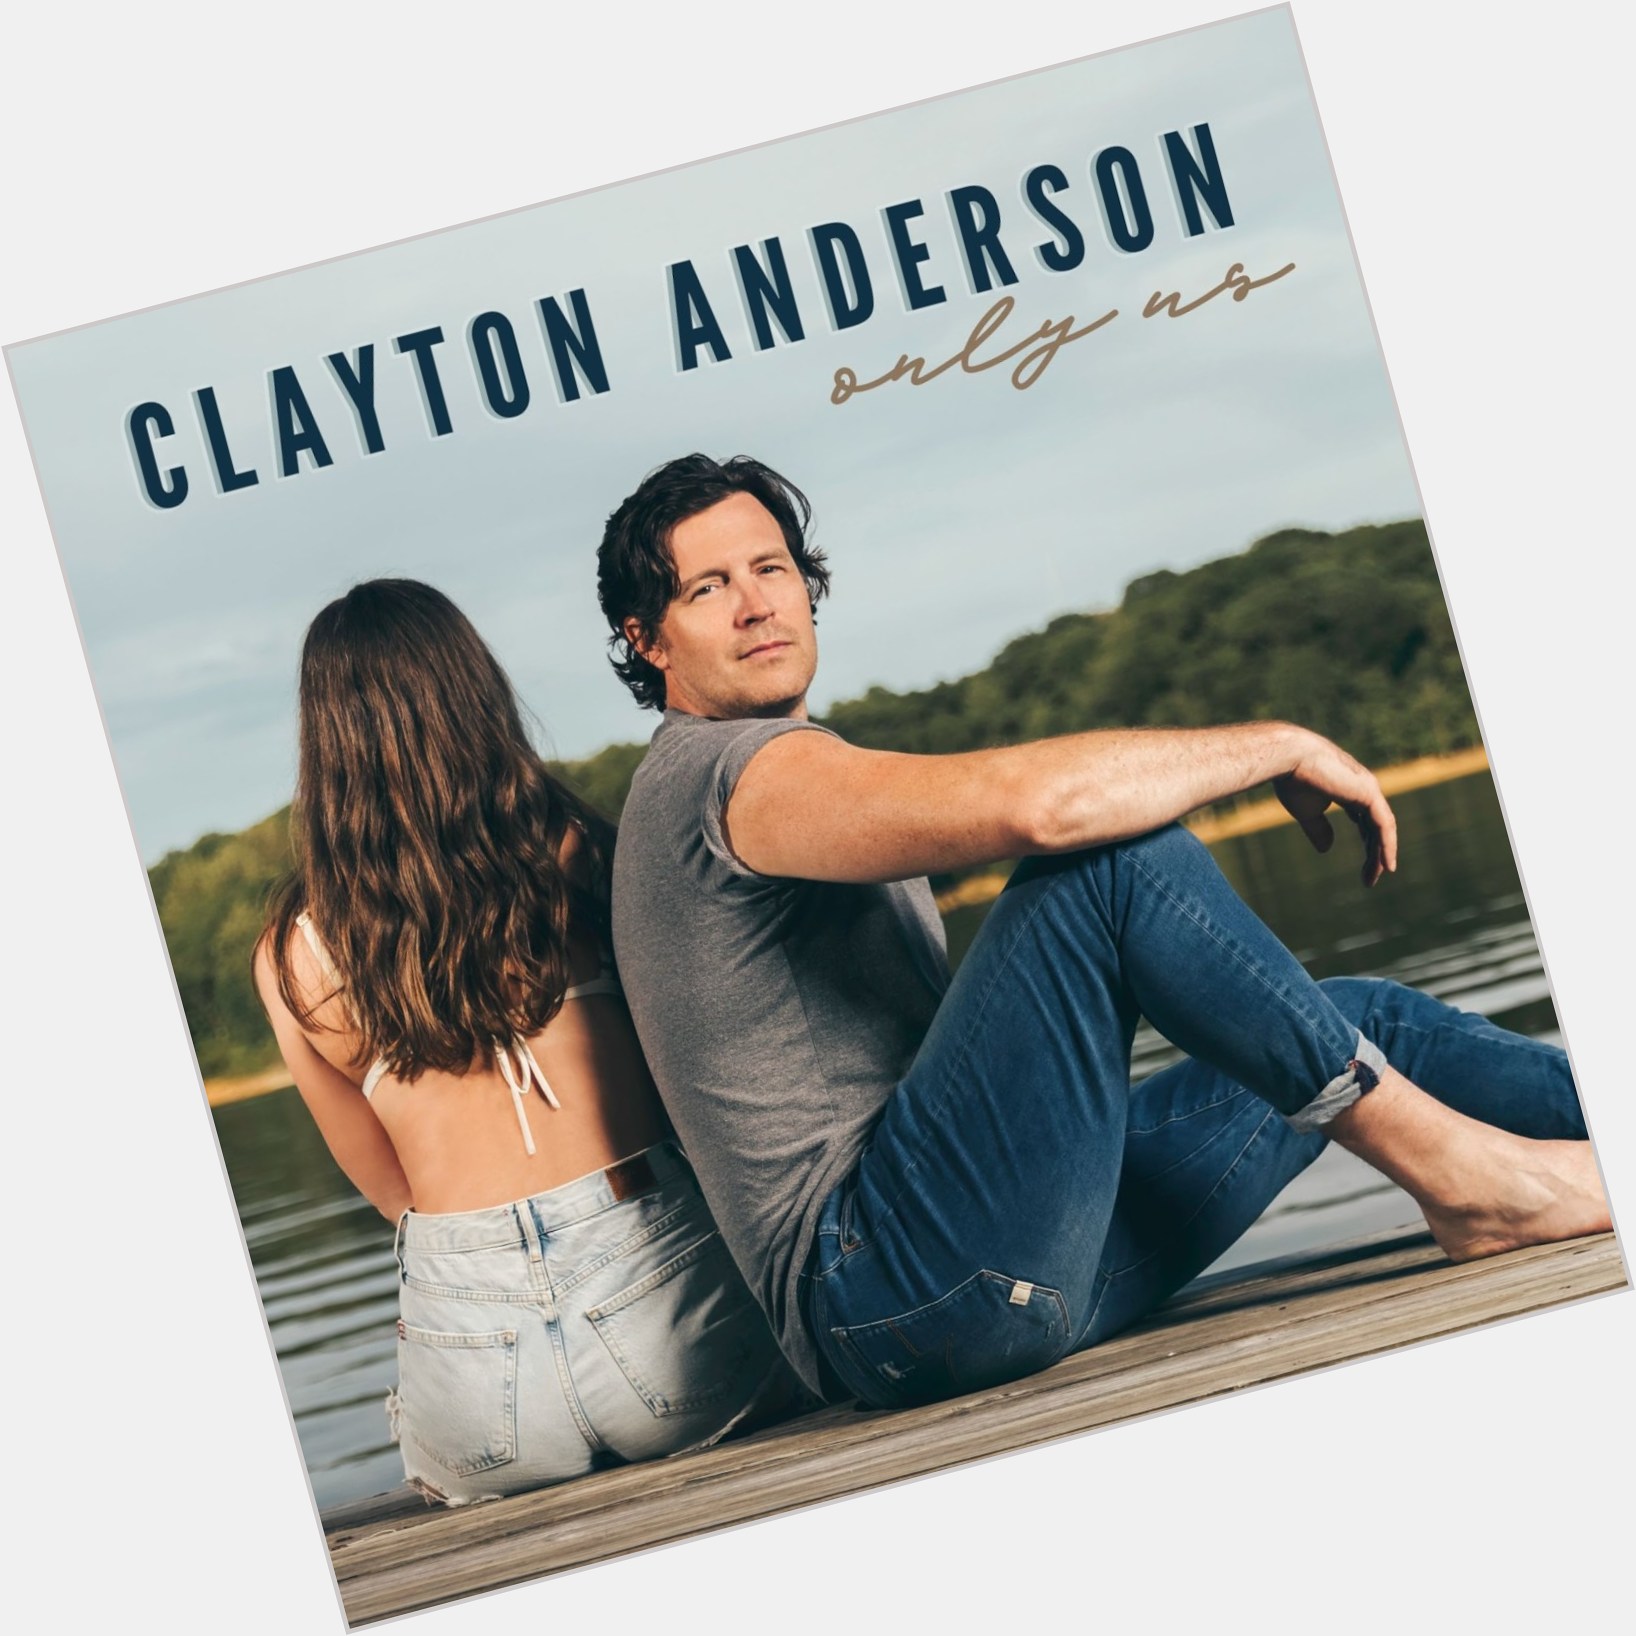 Clayton Anderson dating 2